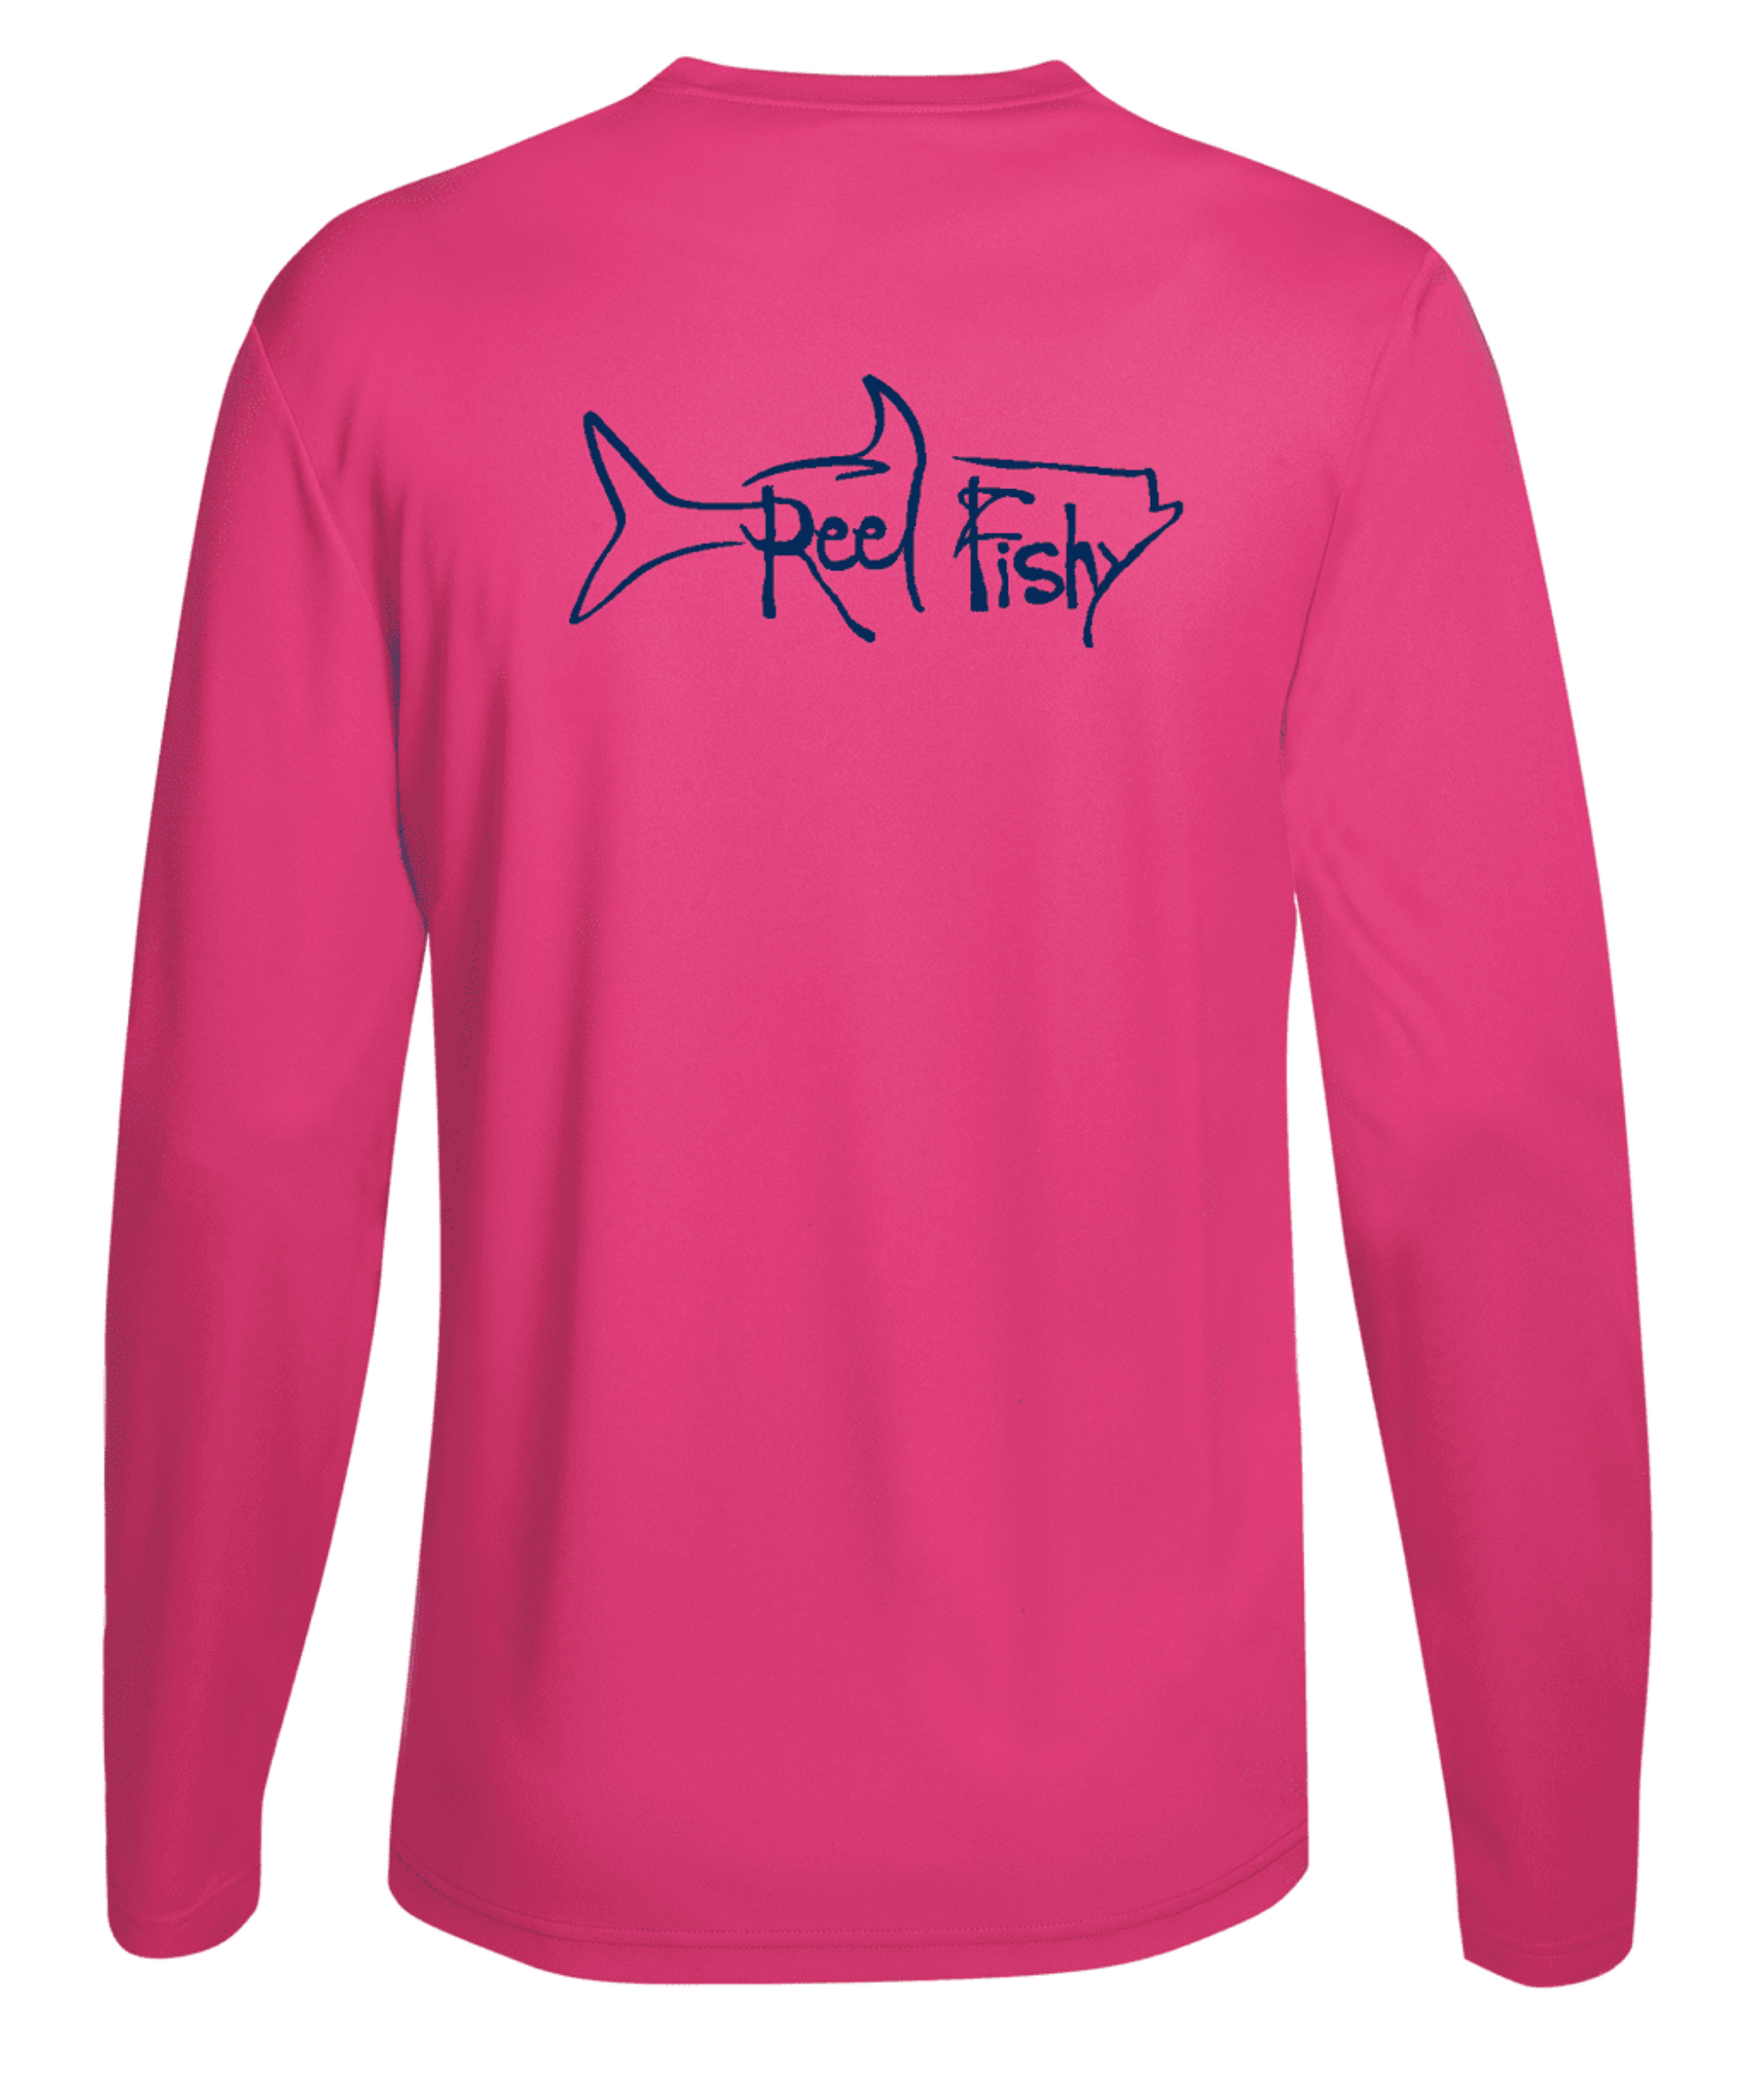 Performance Dry-Fit Tarpon Fishing long sleeve shirts with Sun Protection by Reel Fishy in Pink